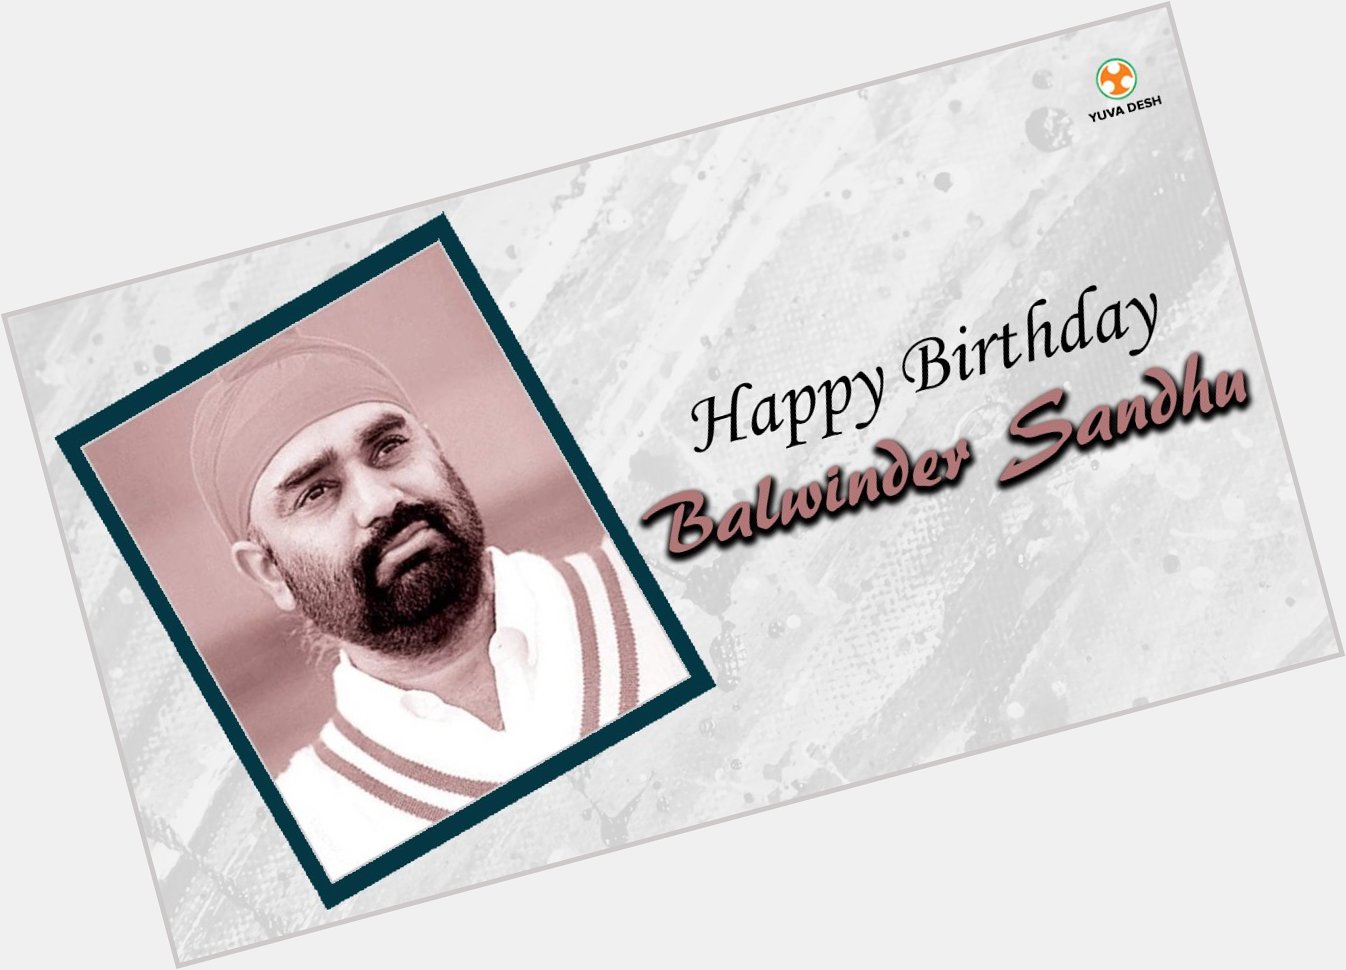  Desh wishes a happy birthday to Balwinder Sandhu, former test cricketer. He turned 61 today. 